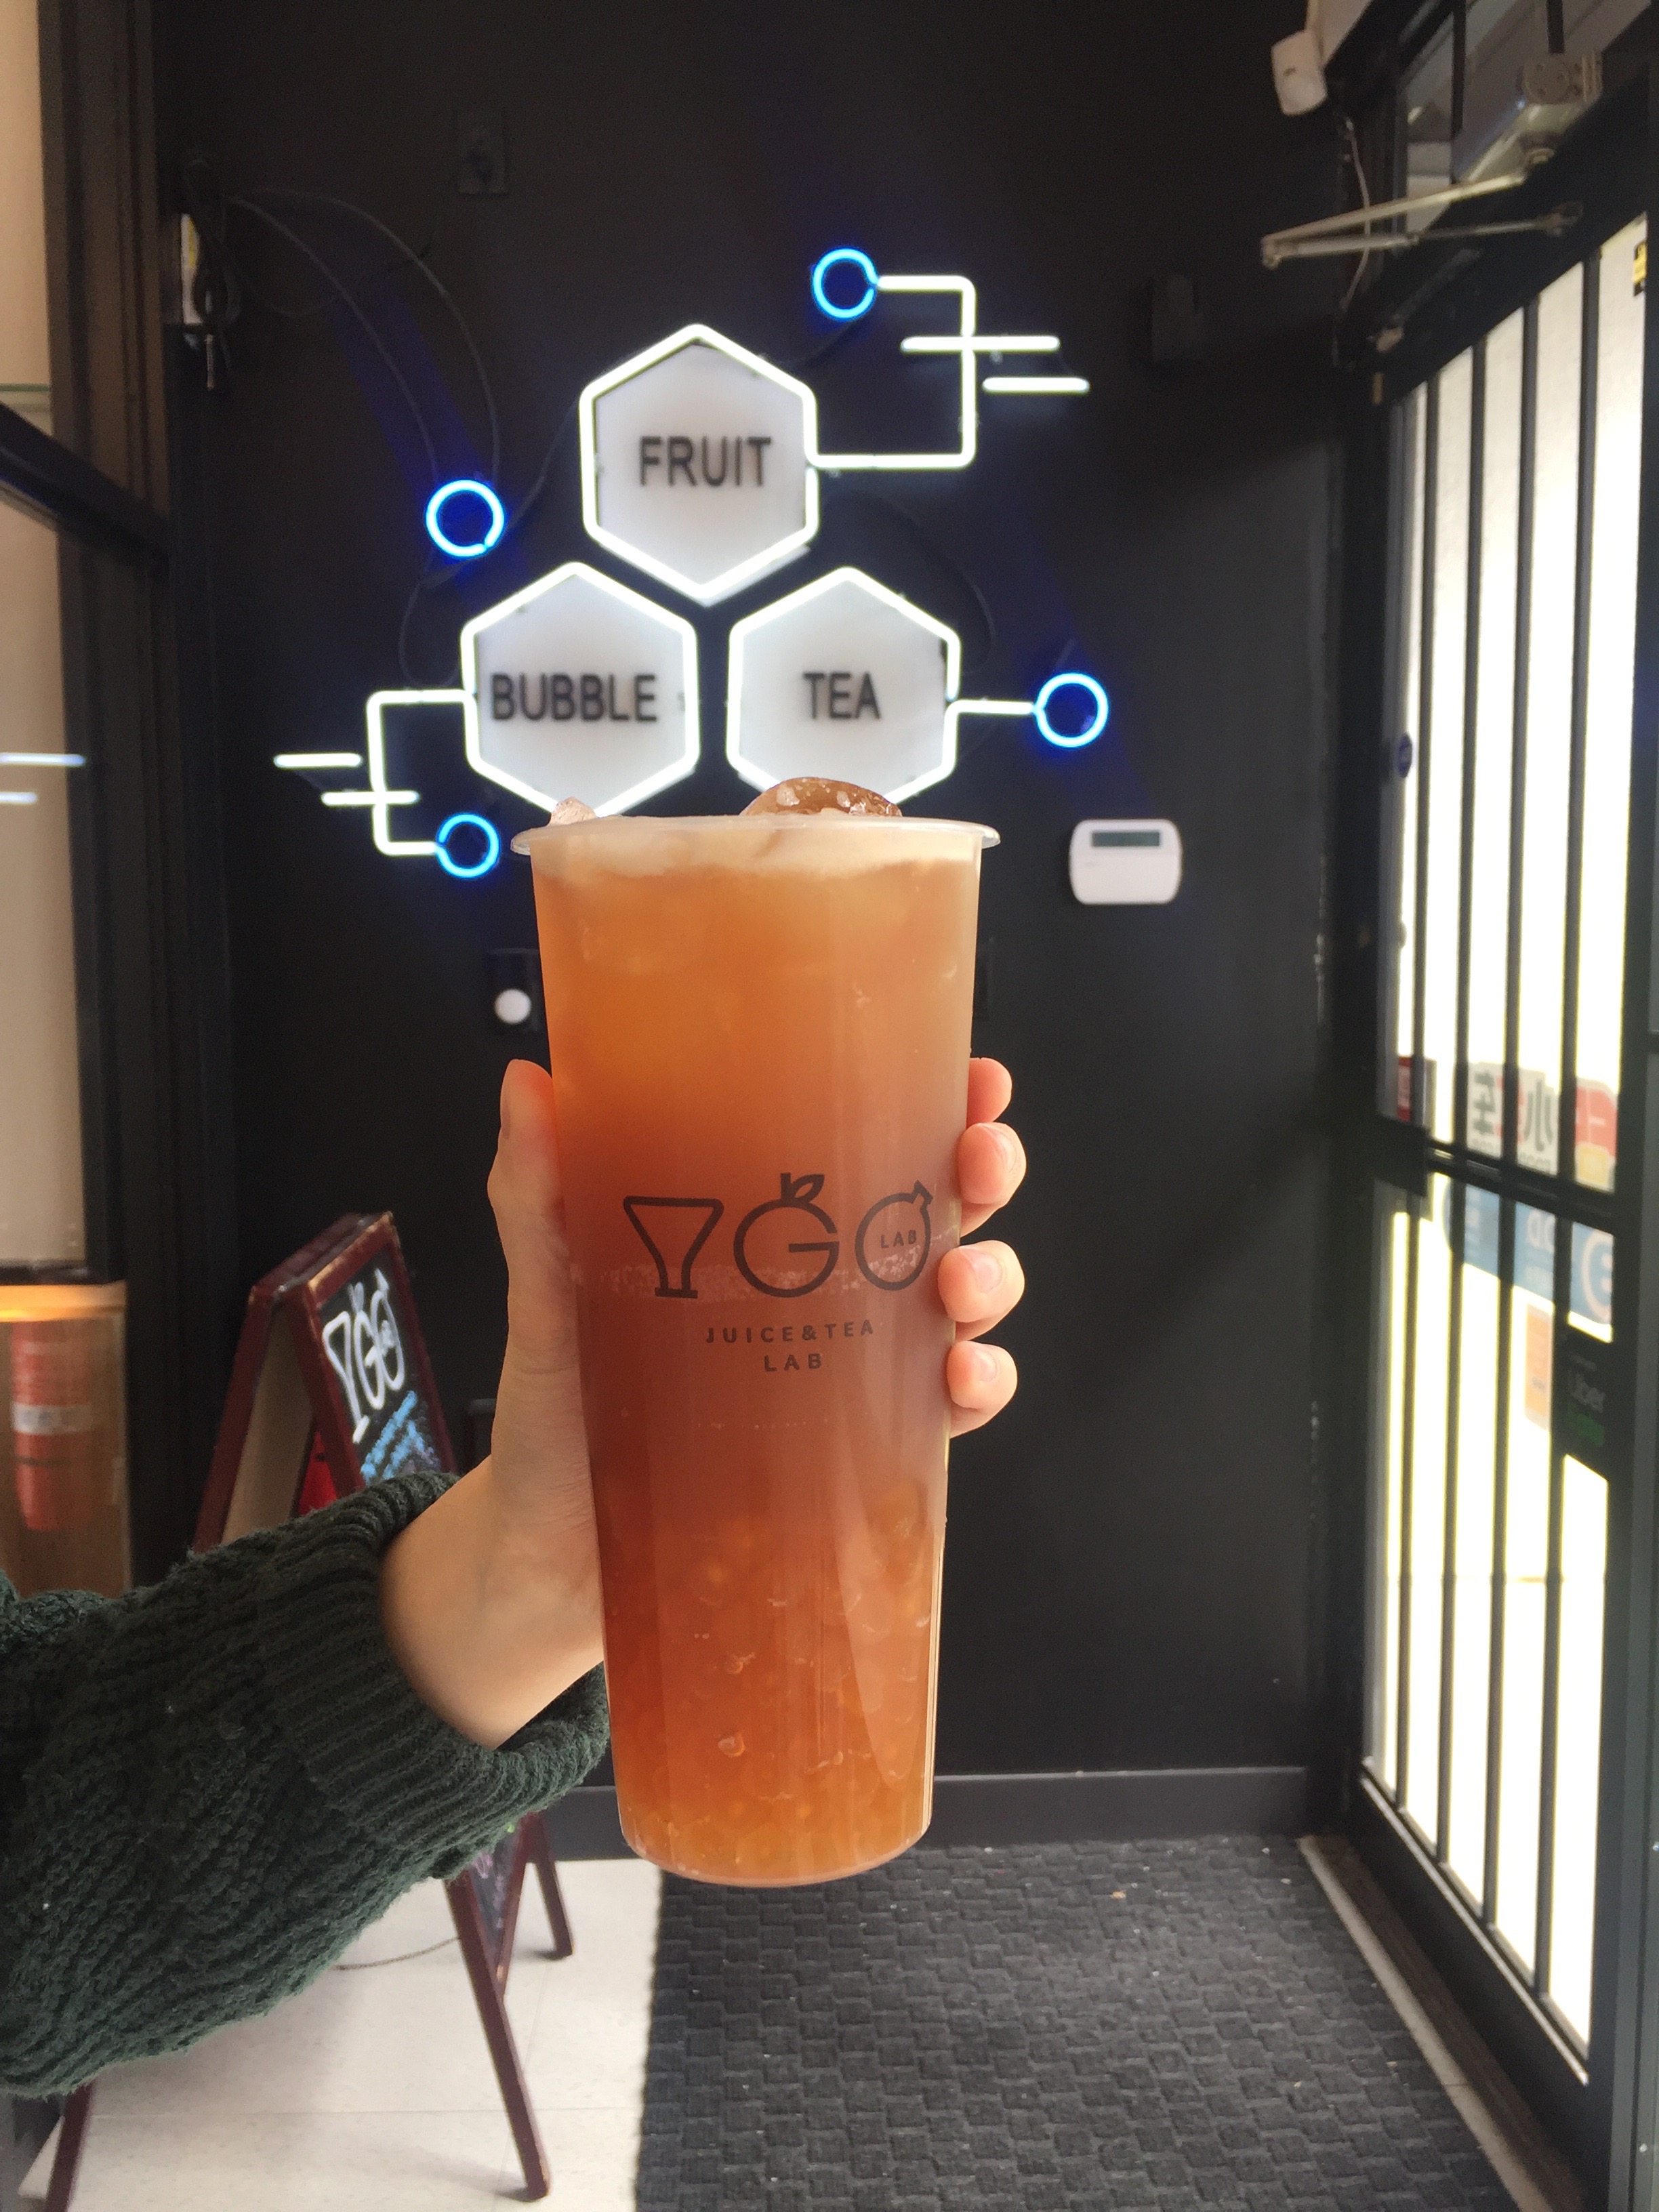 Heads up: There's a New Bubble Tea Place Near Campus ...